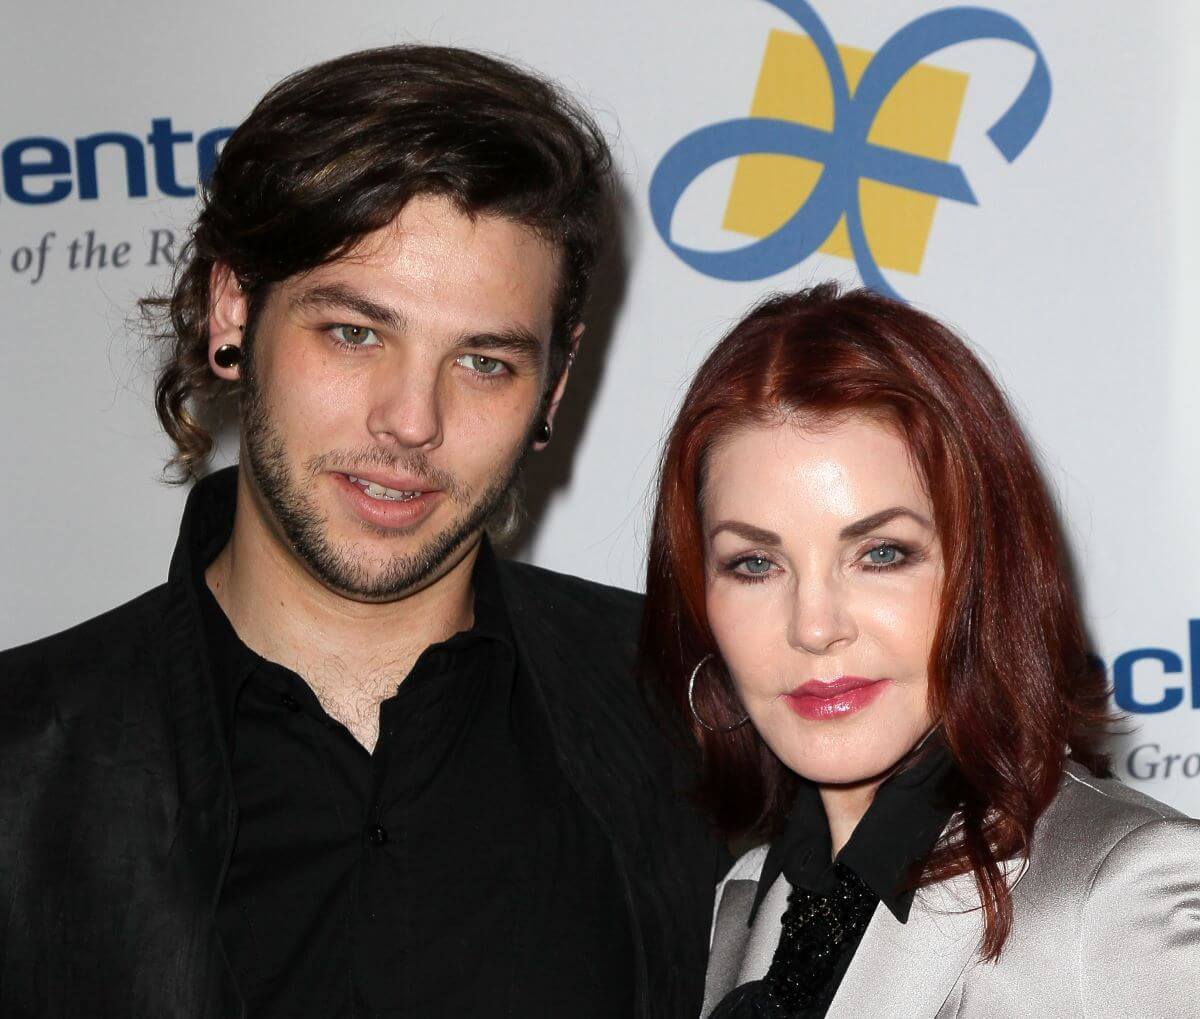 Priscilla Presley wears a silver jacket and stands with her son Navarone Garvia, who wears a black shirt.